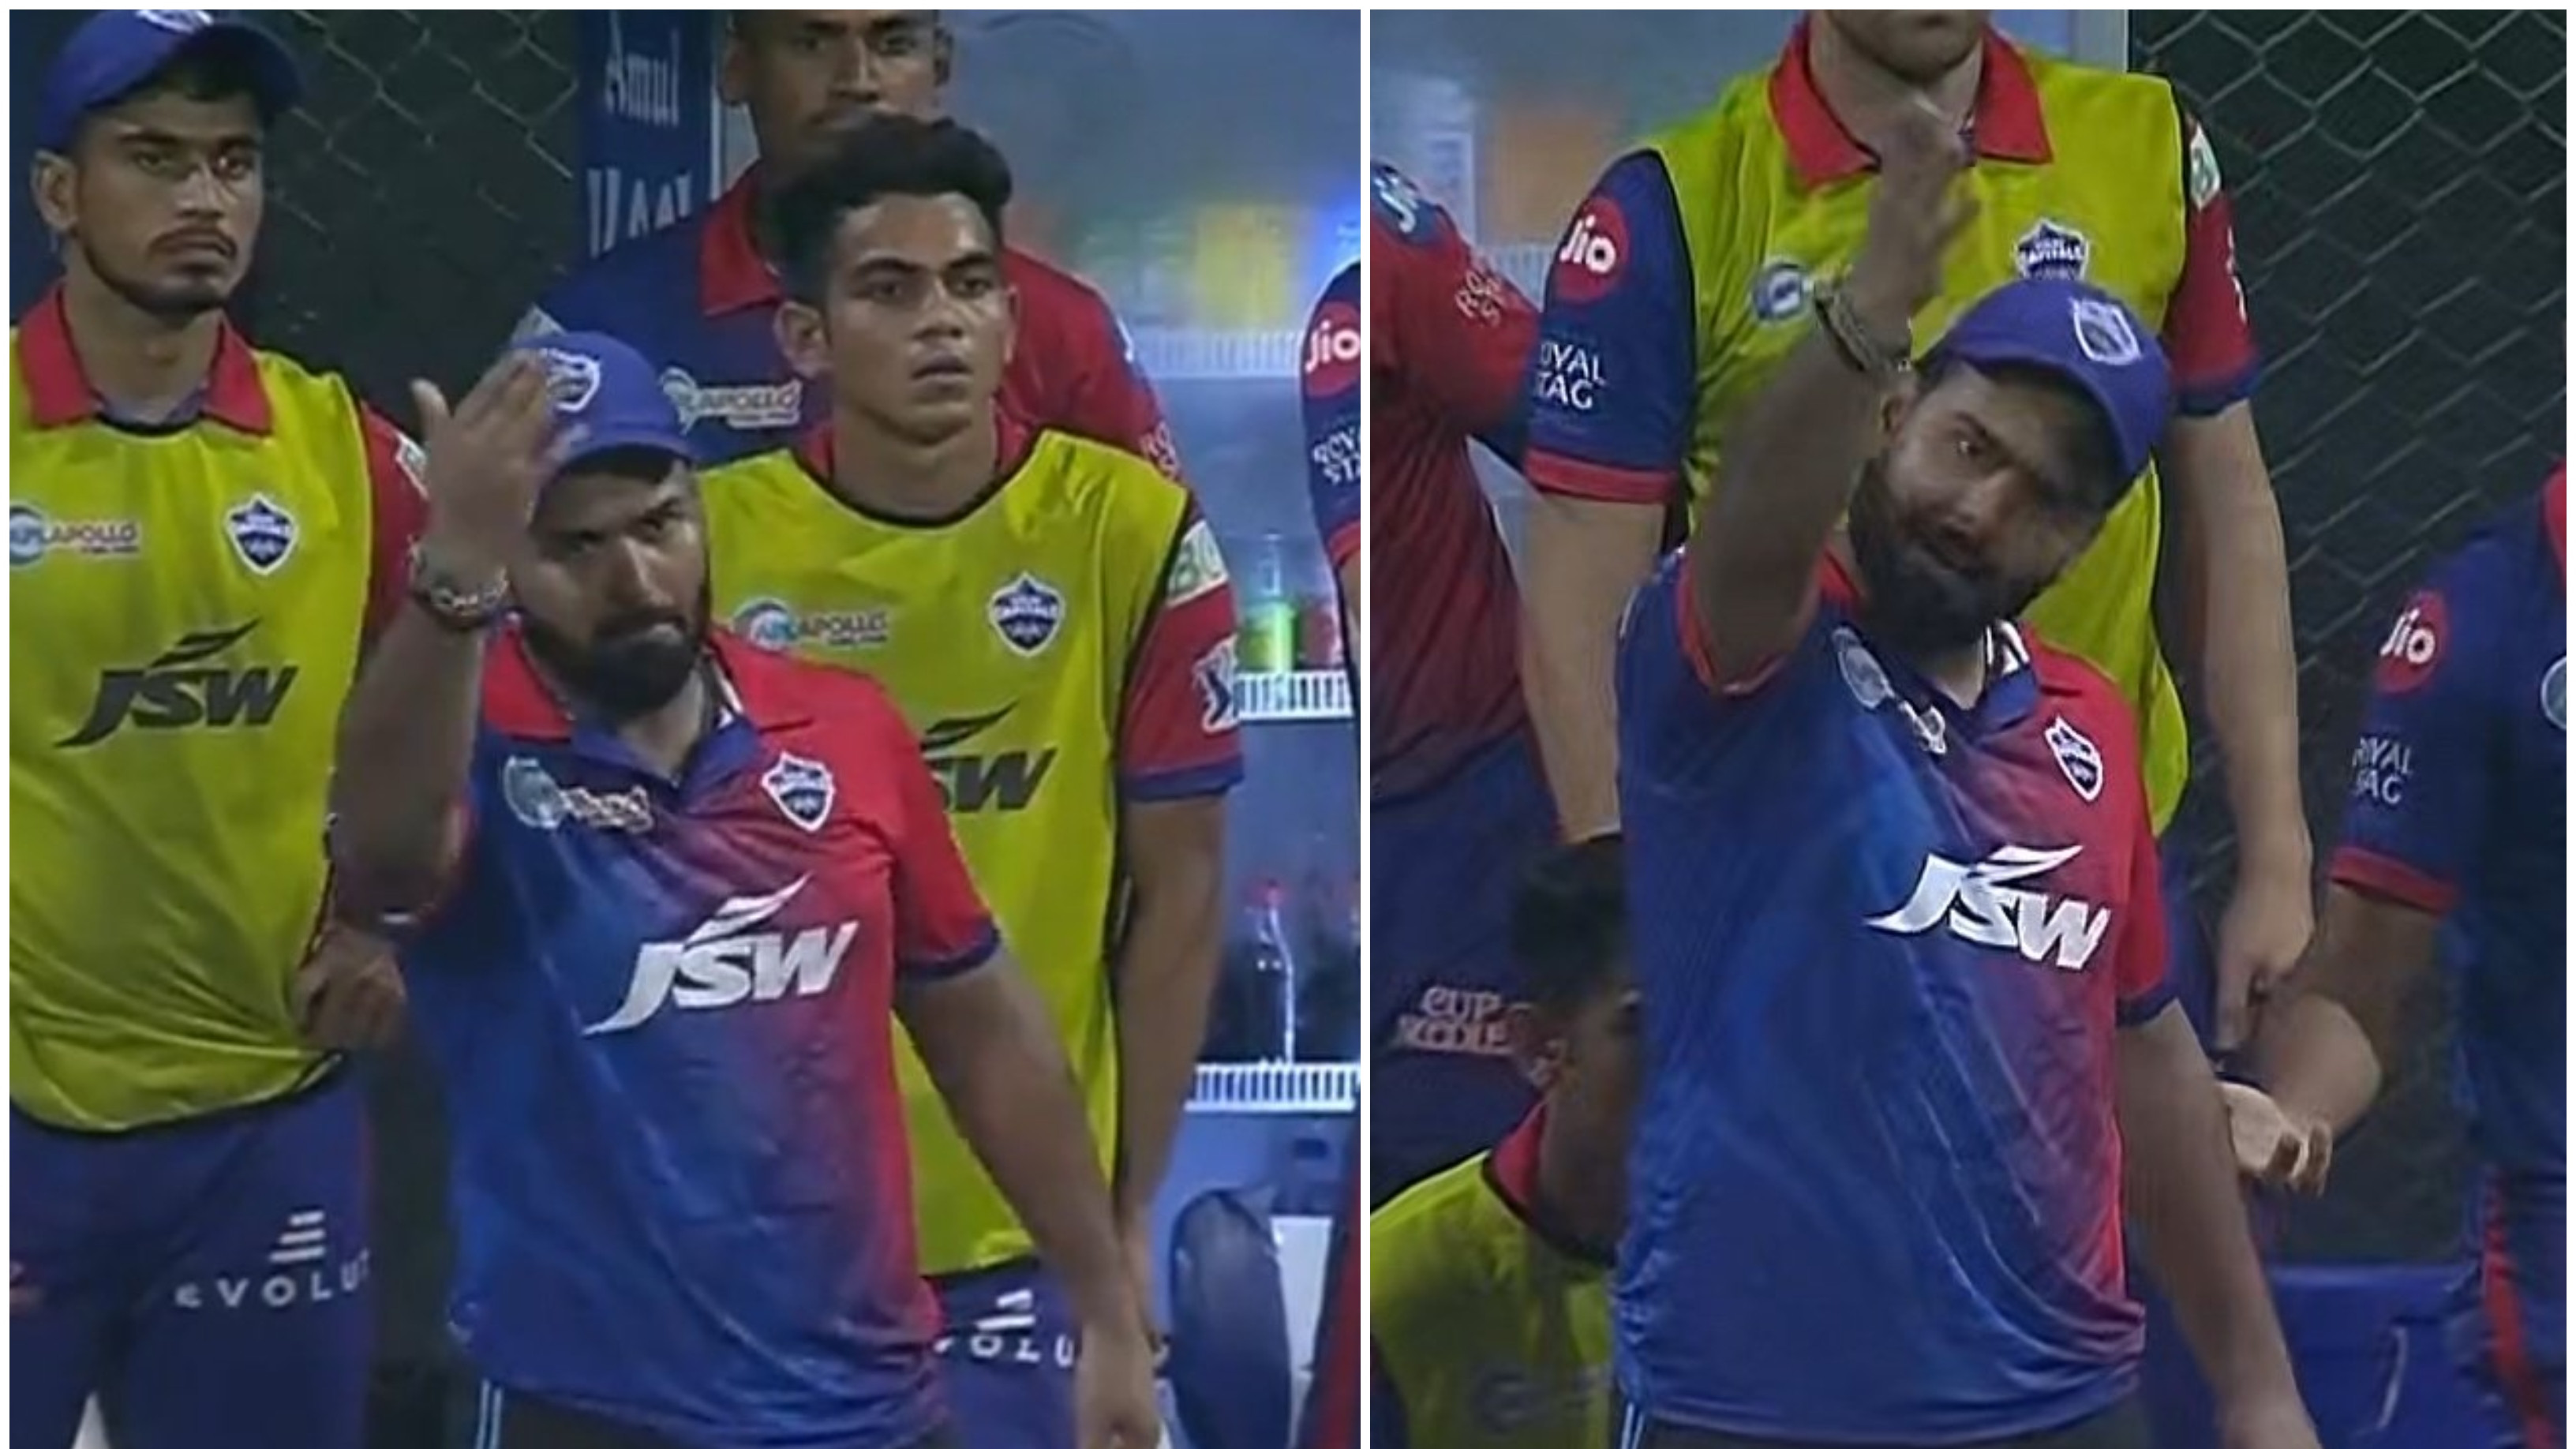 IPL 2022: “Gully Cricket”, Twitterati react as Rishabh Pant asks DC batters to leave pitch after being denied no ball